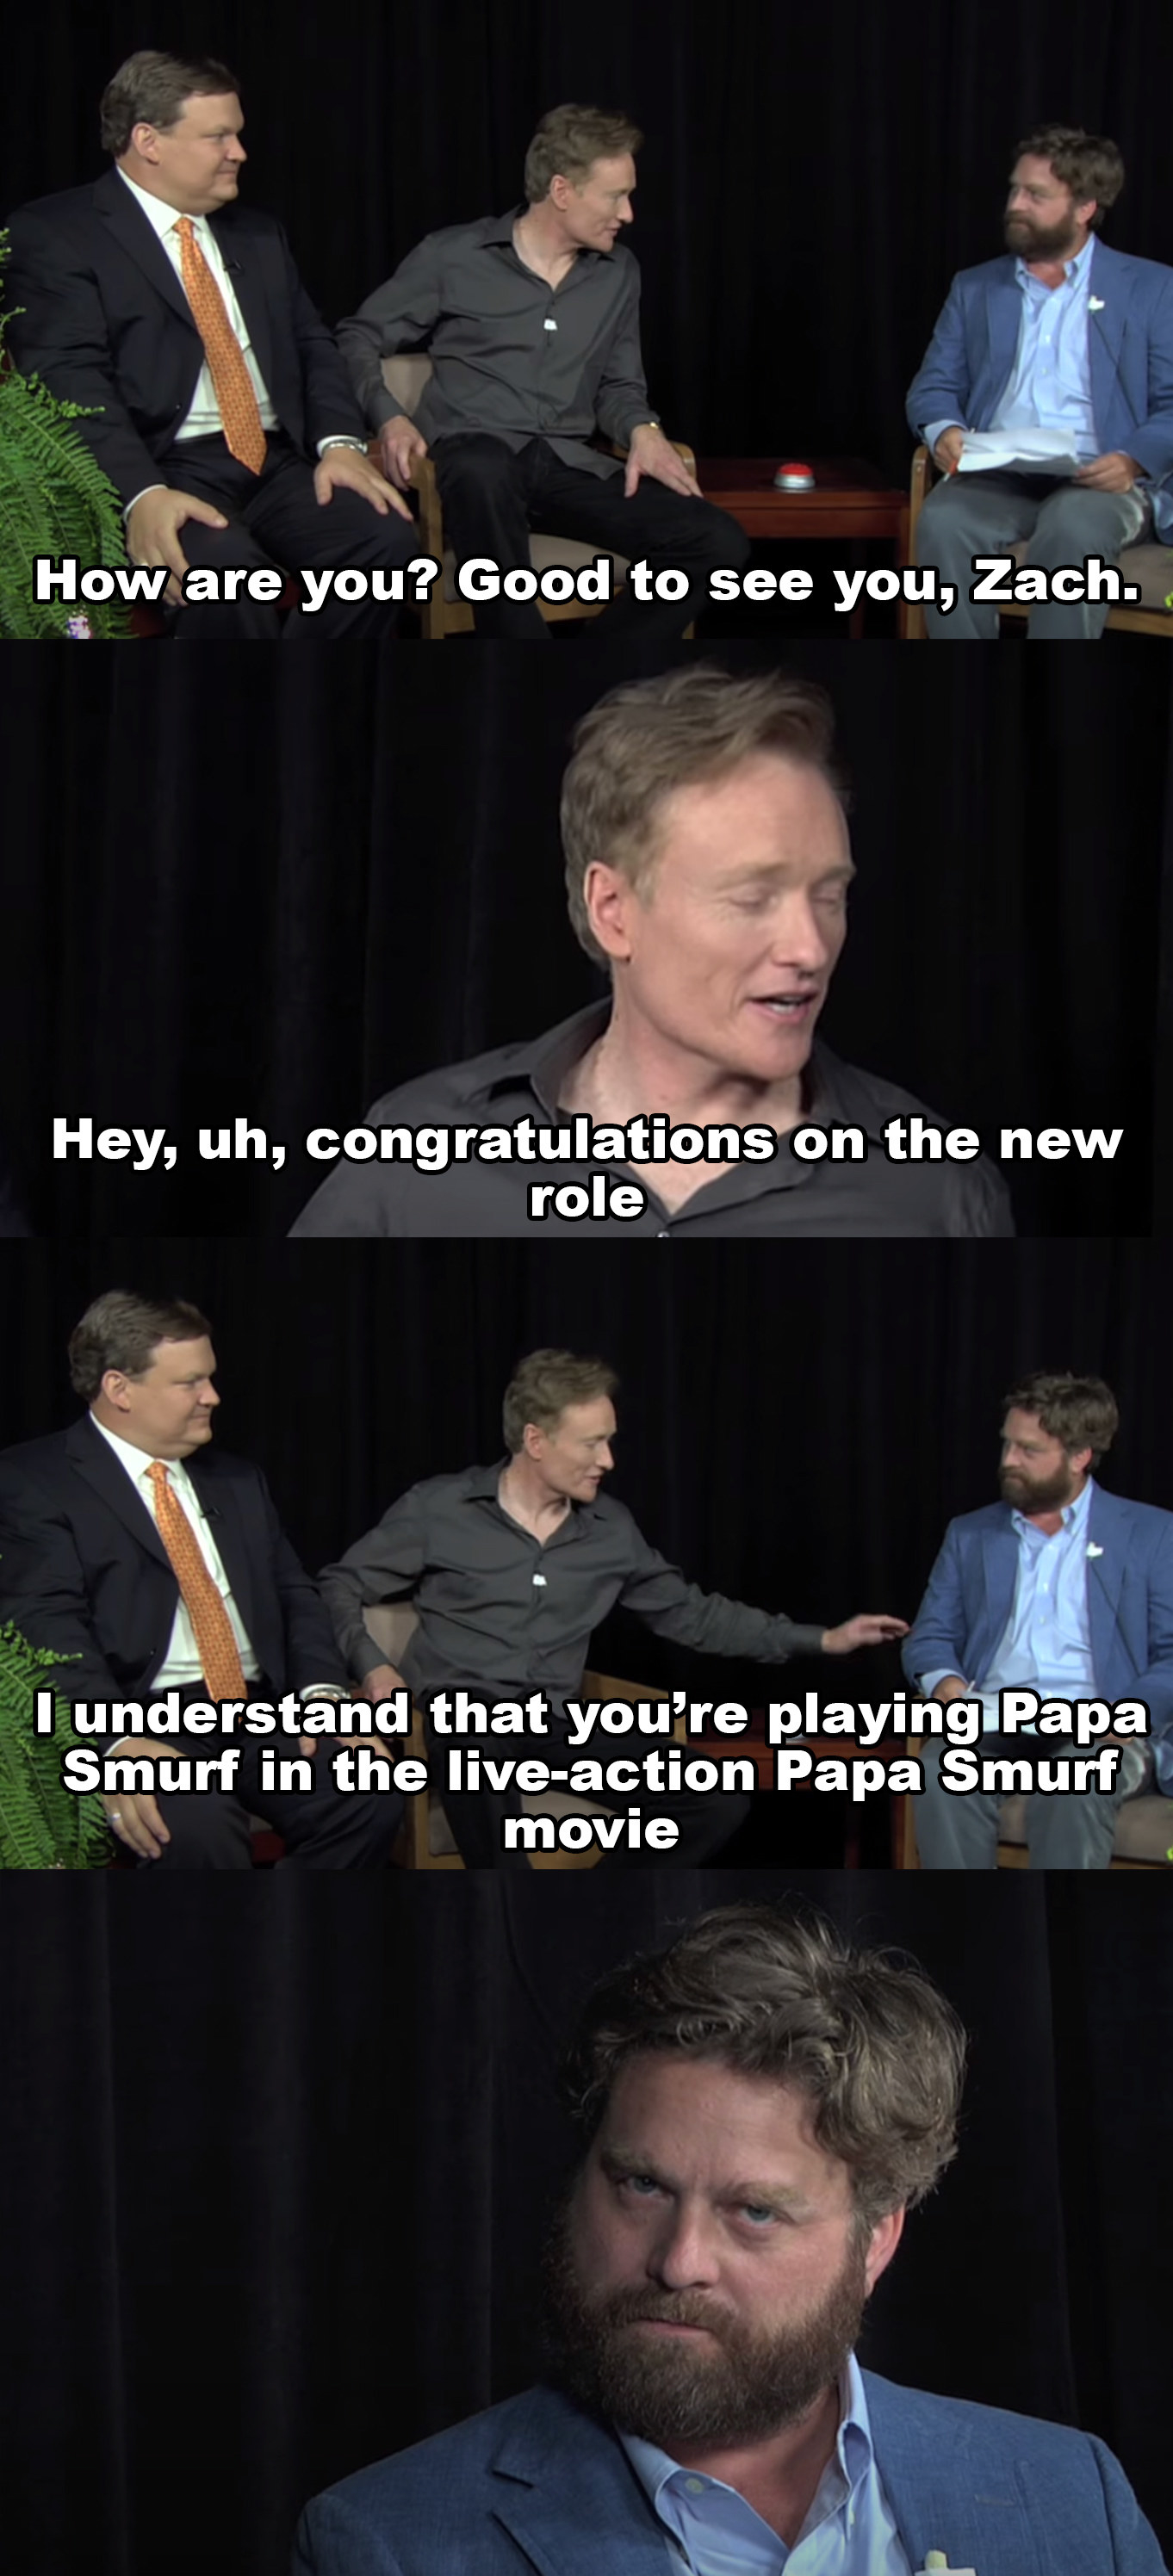 Conan: How are you? Good to see you, Zach Hey uh congratulations on the new role, I understand you&#x27;re playing Papa Smurf in the live action Papa Smurf movie